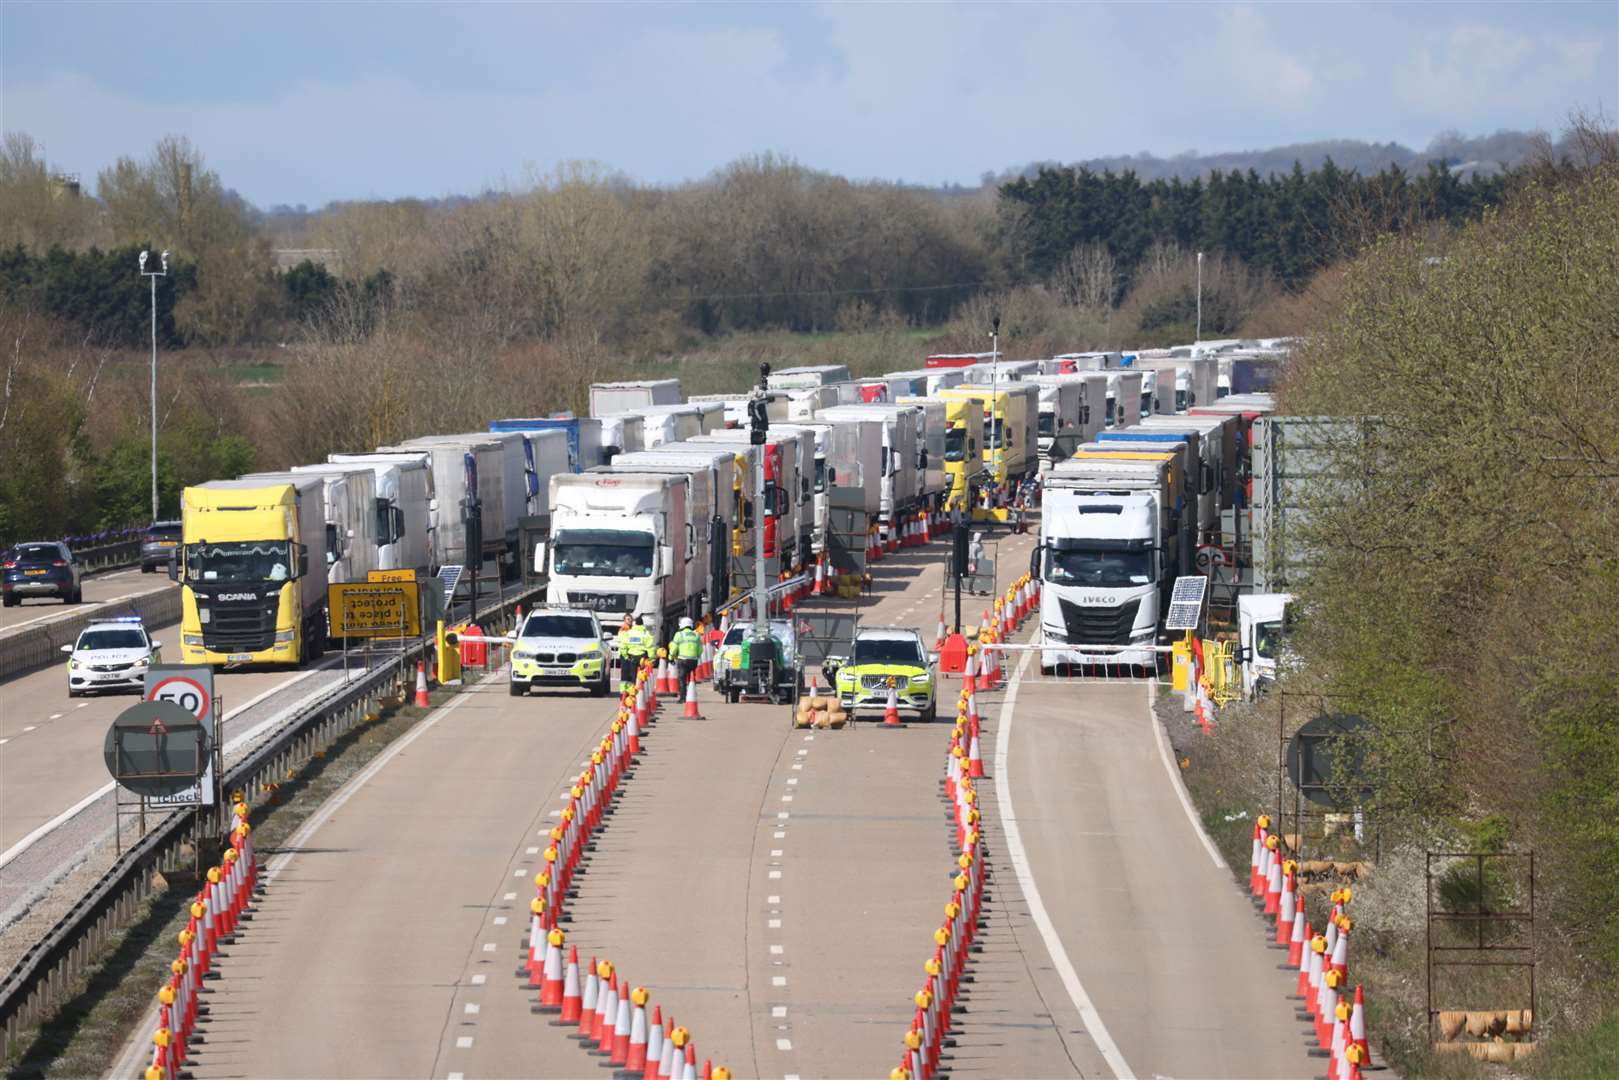 Operation Brock is holding thousands of lorries along the M20